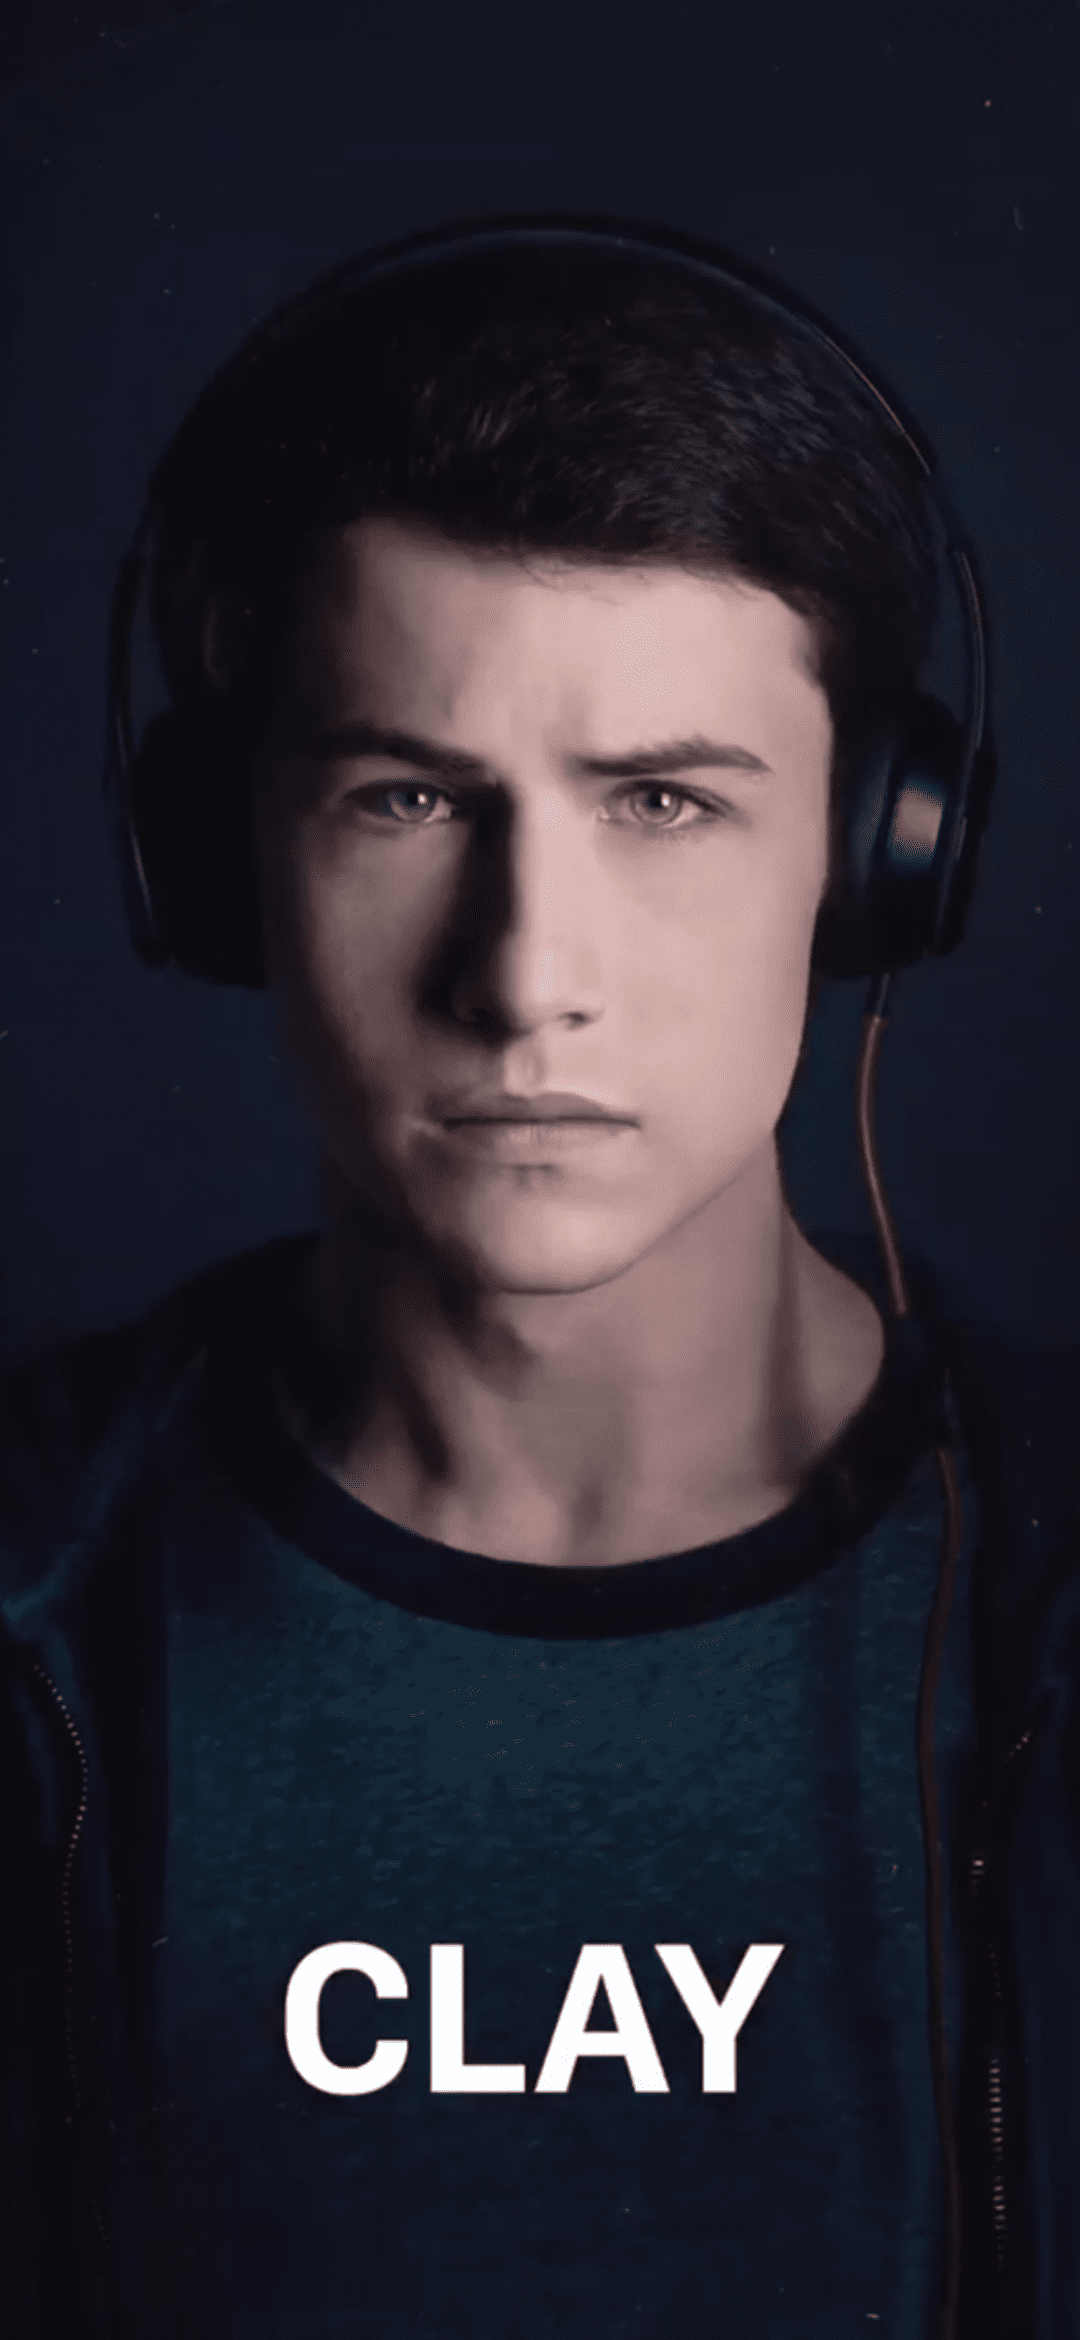 Reasons Why Wallpaper: Top Best 13 Reasons Why Background Download